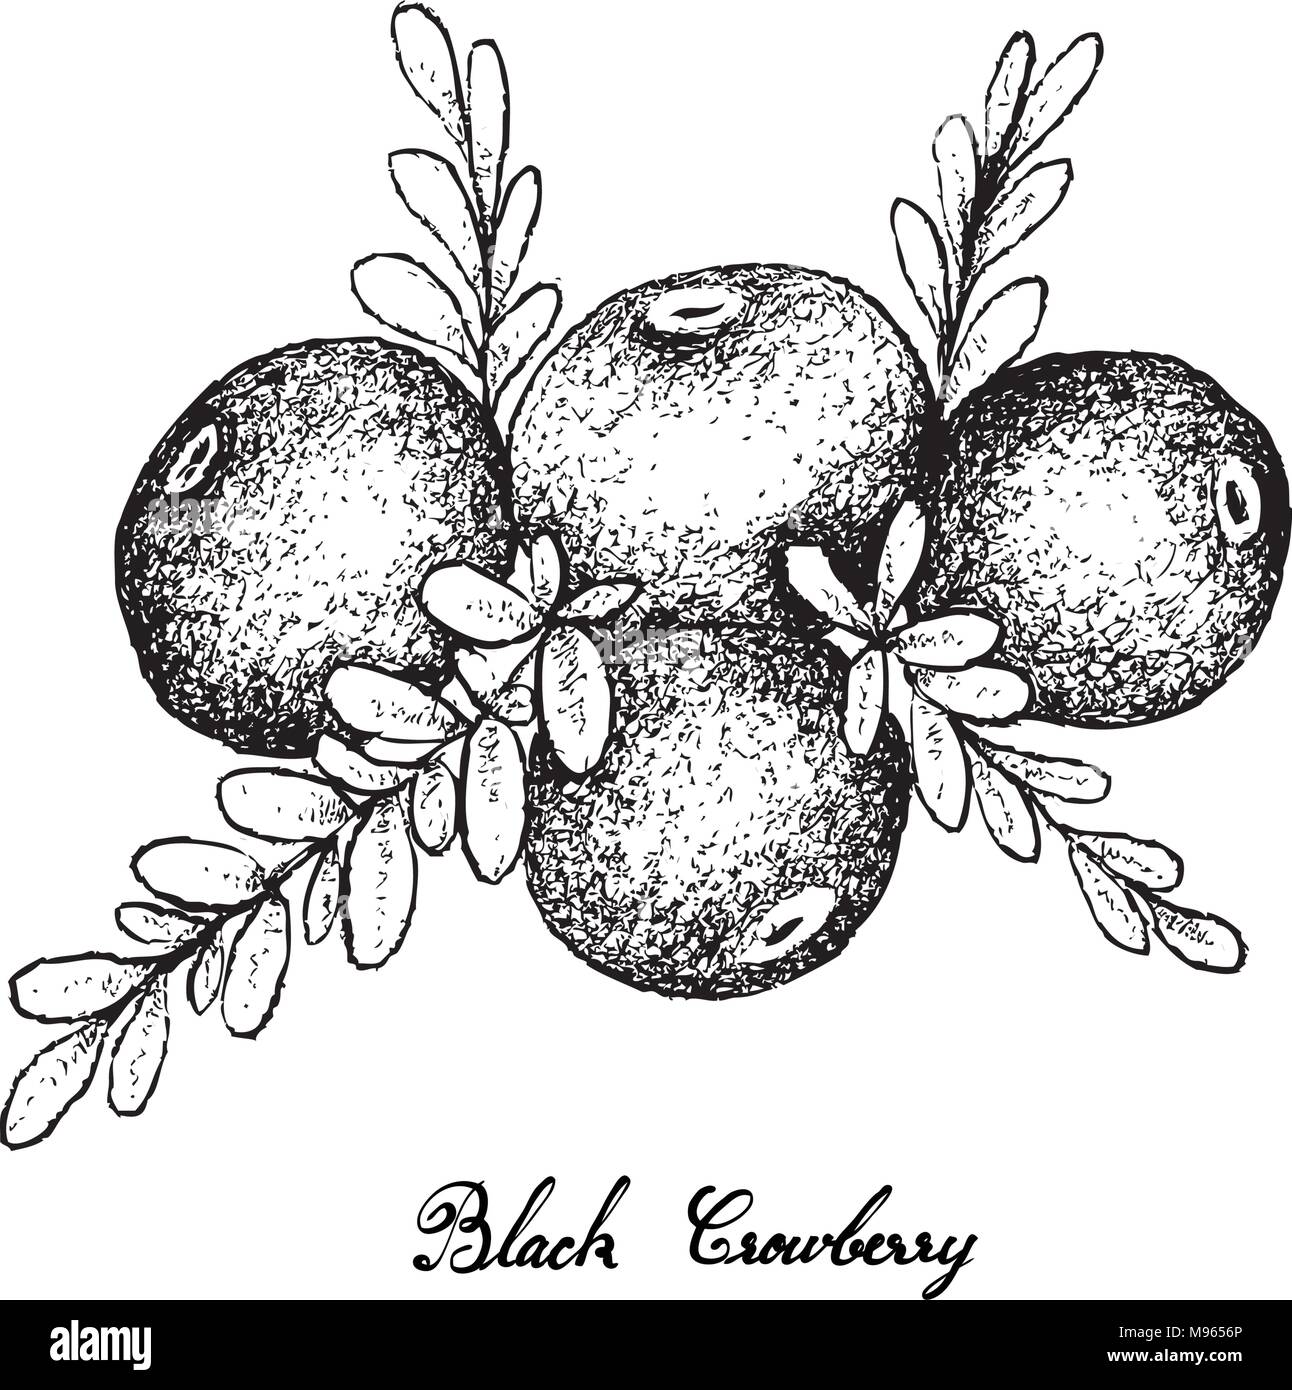 Berry Fruit, Illustration Hand Drawn Sketch of Black Crowberry or Empetrum Nigrum Fruits Isolated on White Background. Stock Vector